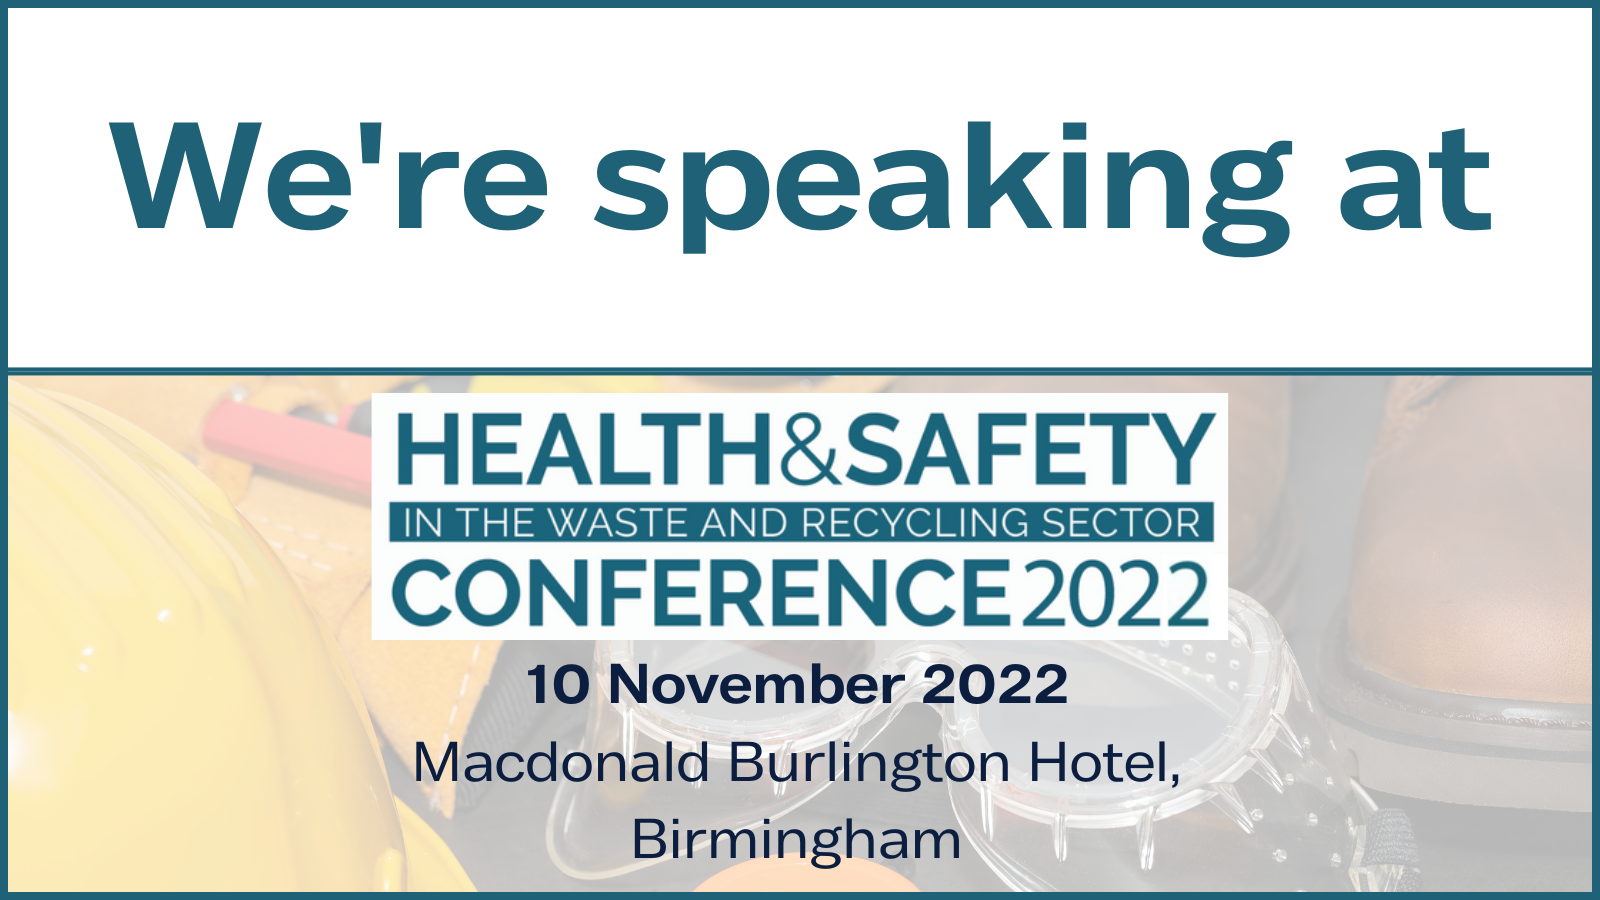 Come and meet us at Health and Safety Conference 2022